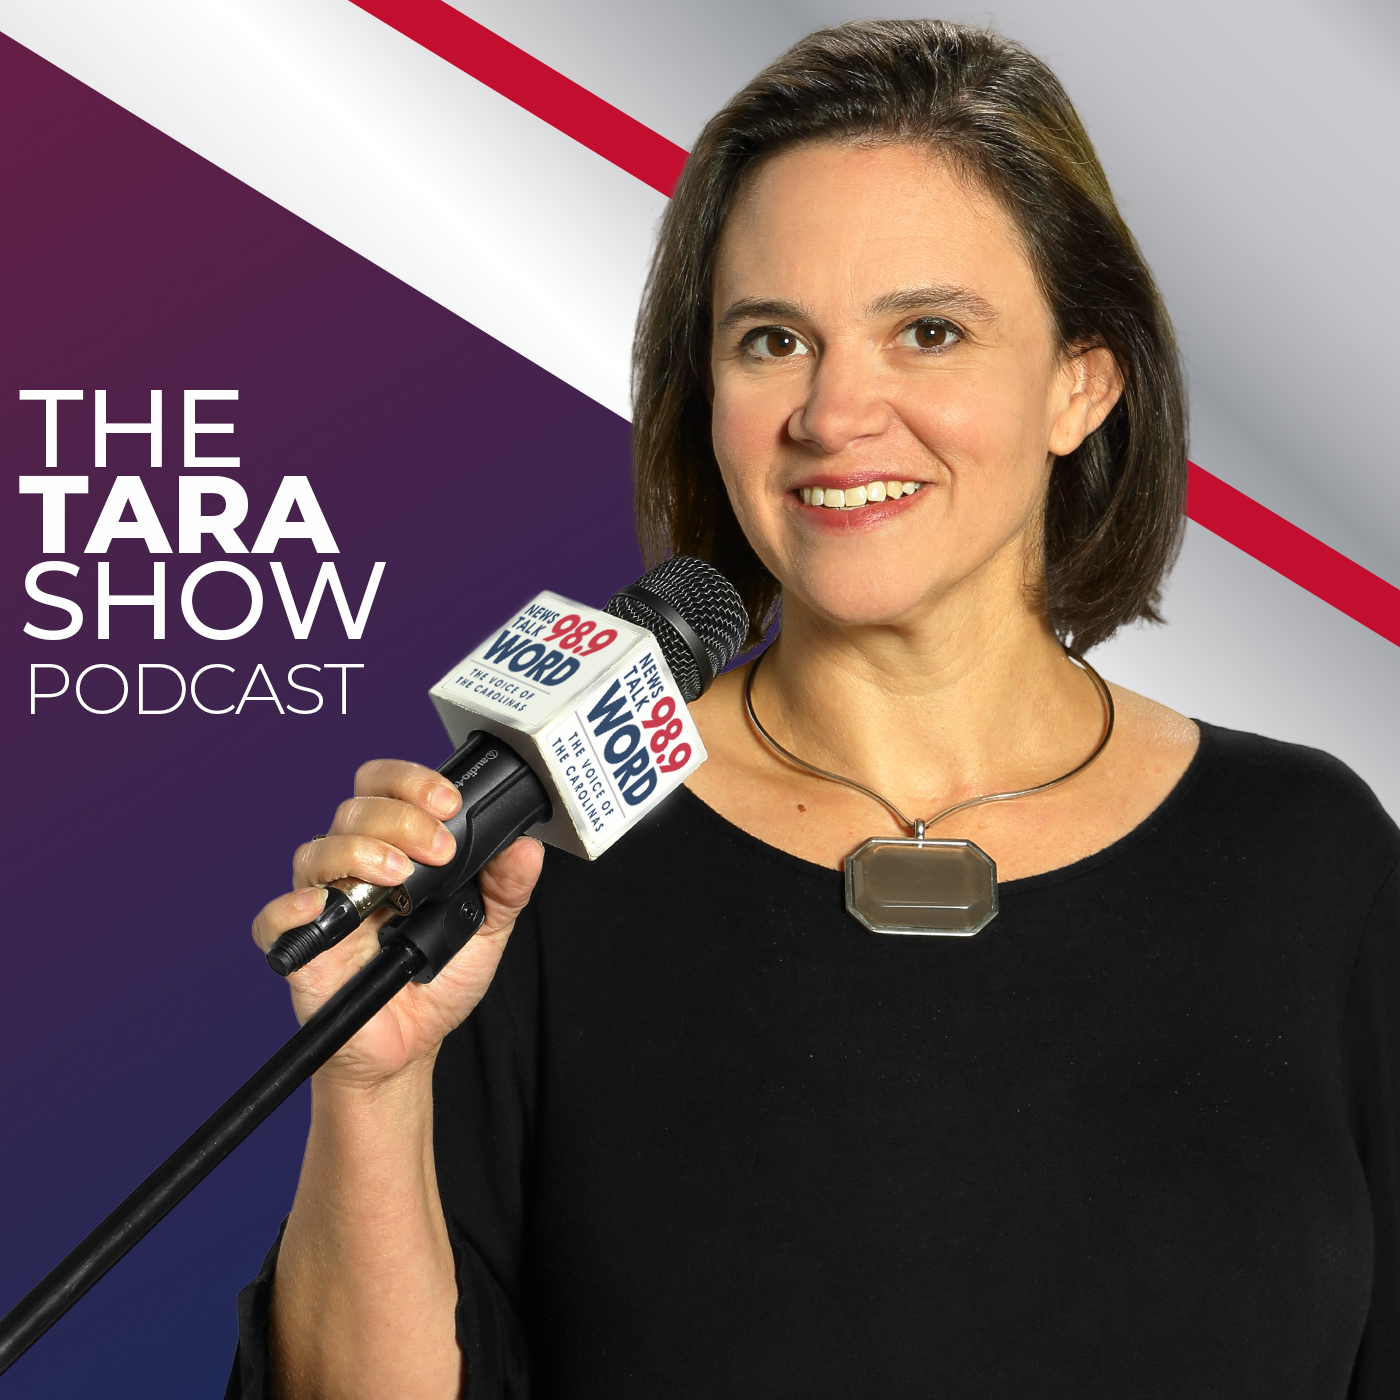 Hour 4: The Tara Show - “An Unsecured Perimeter” “Risky Living in the State of SC” “Republican Unity with Michelle Woodhouse” “The Devastation of the Democrat Party in Wake of the RNC Convention”